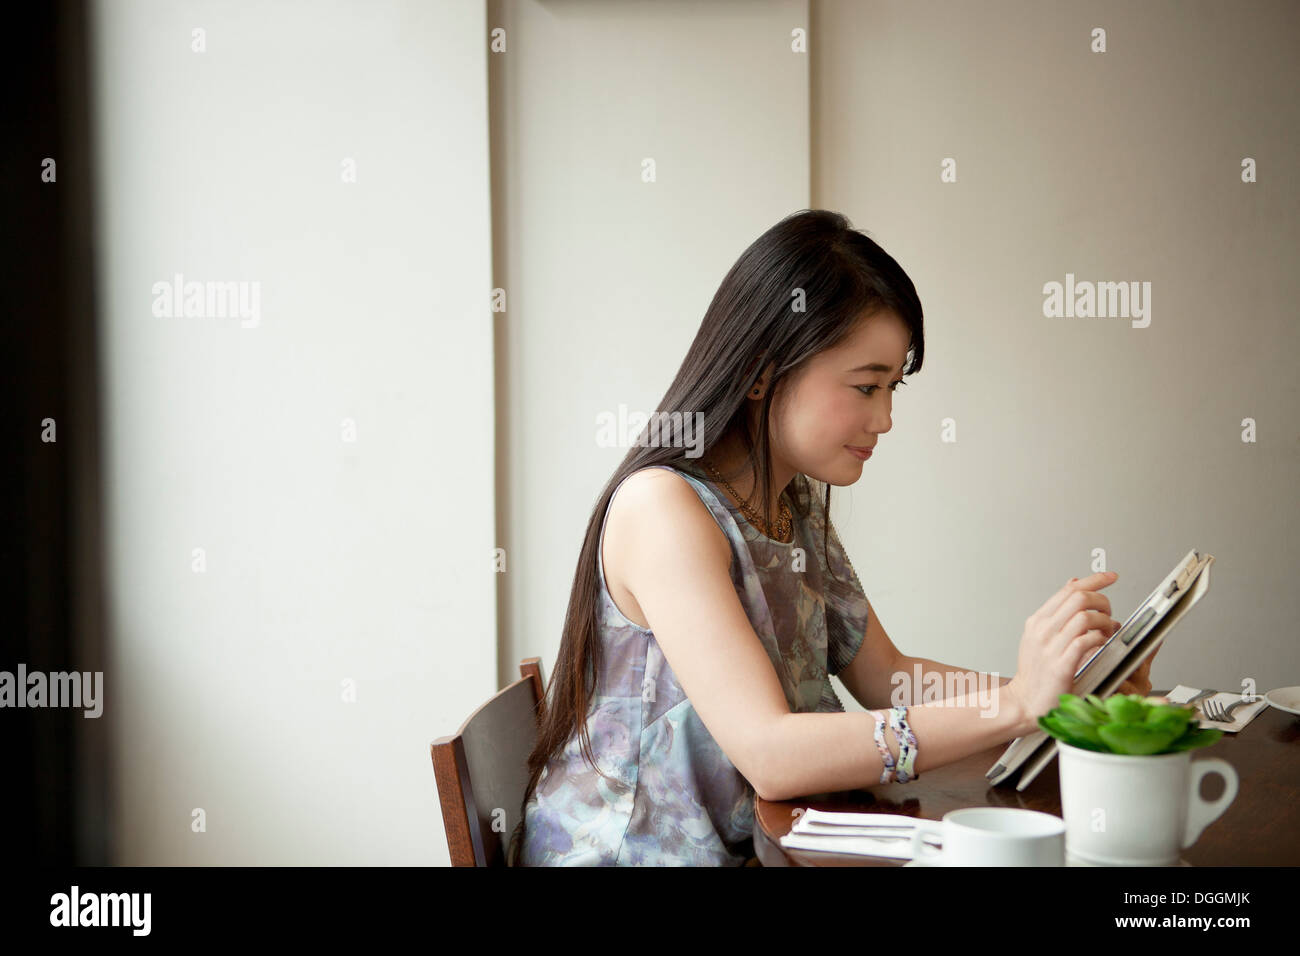 Young woman using digital tablet in restaurant Banque D'Images